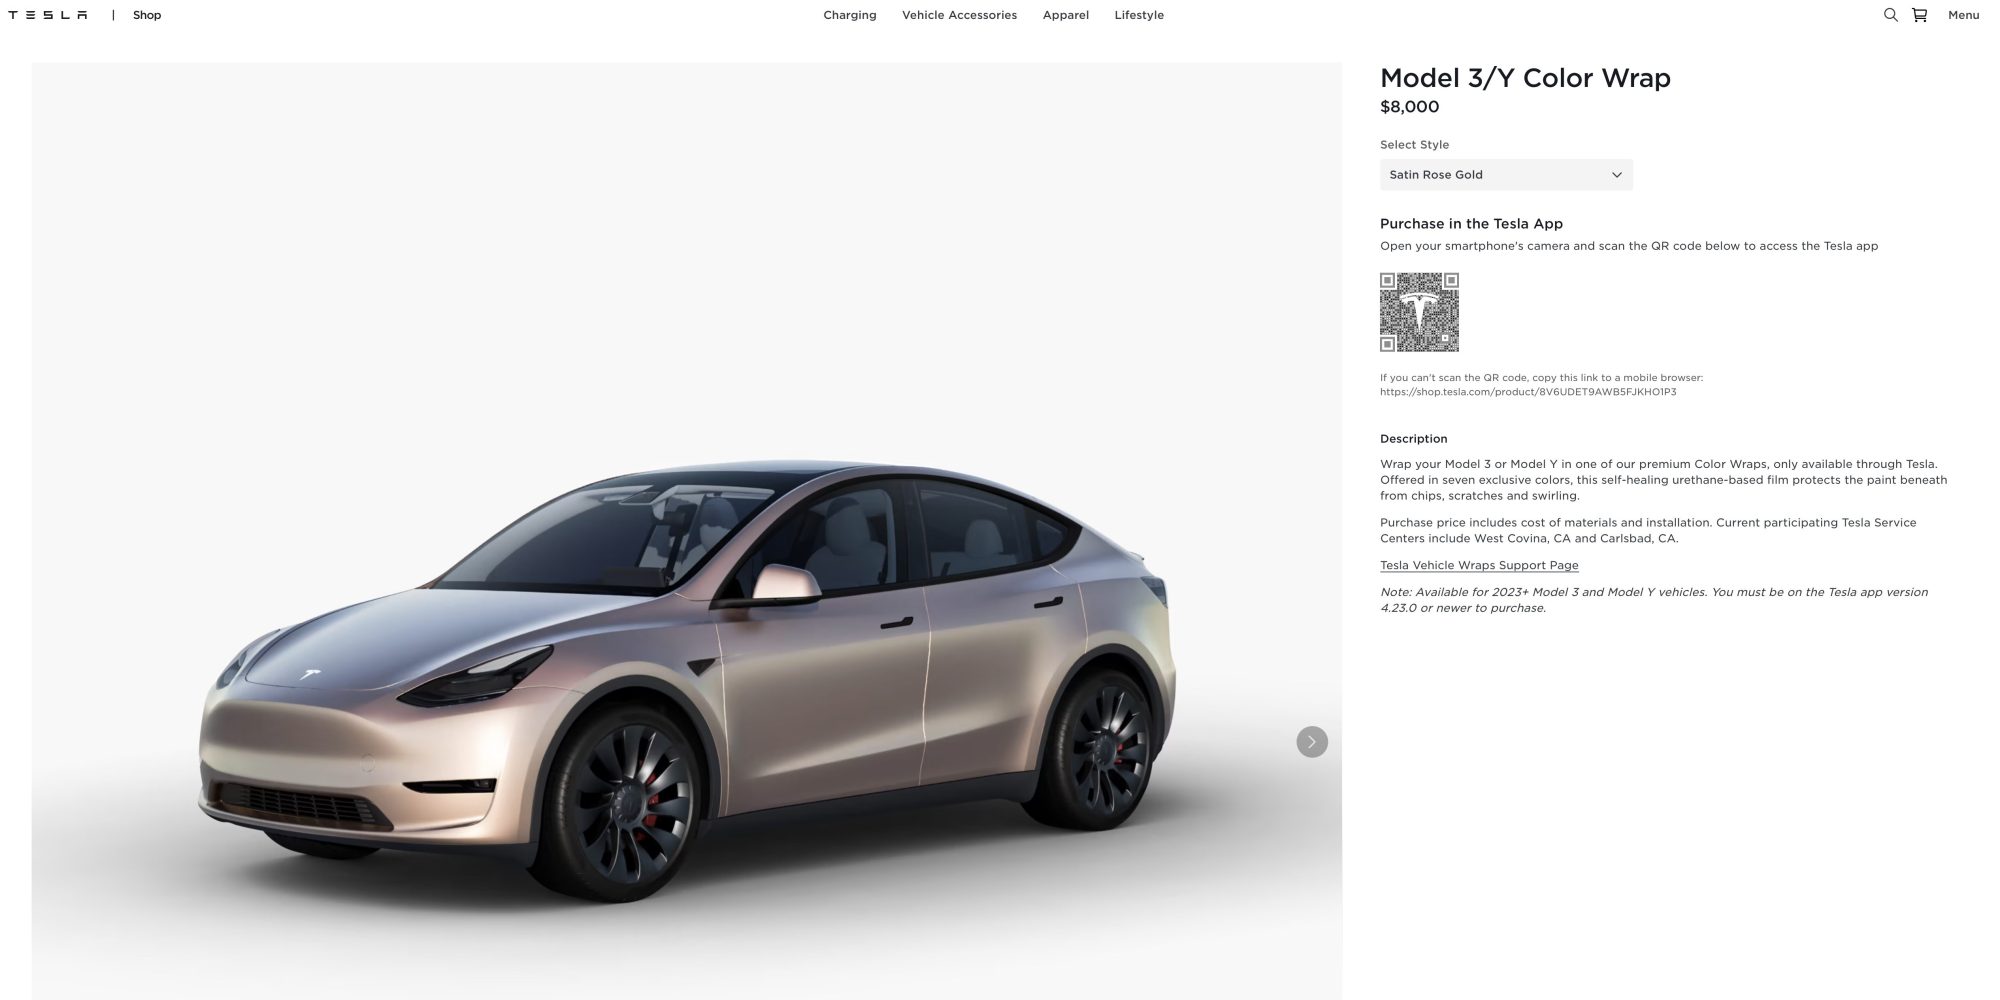 New Accessories in 2023 for your new Tesla Model Y/3 